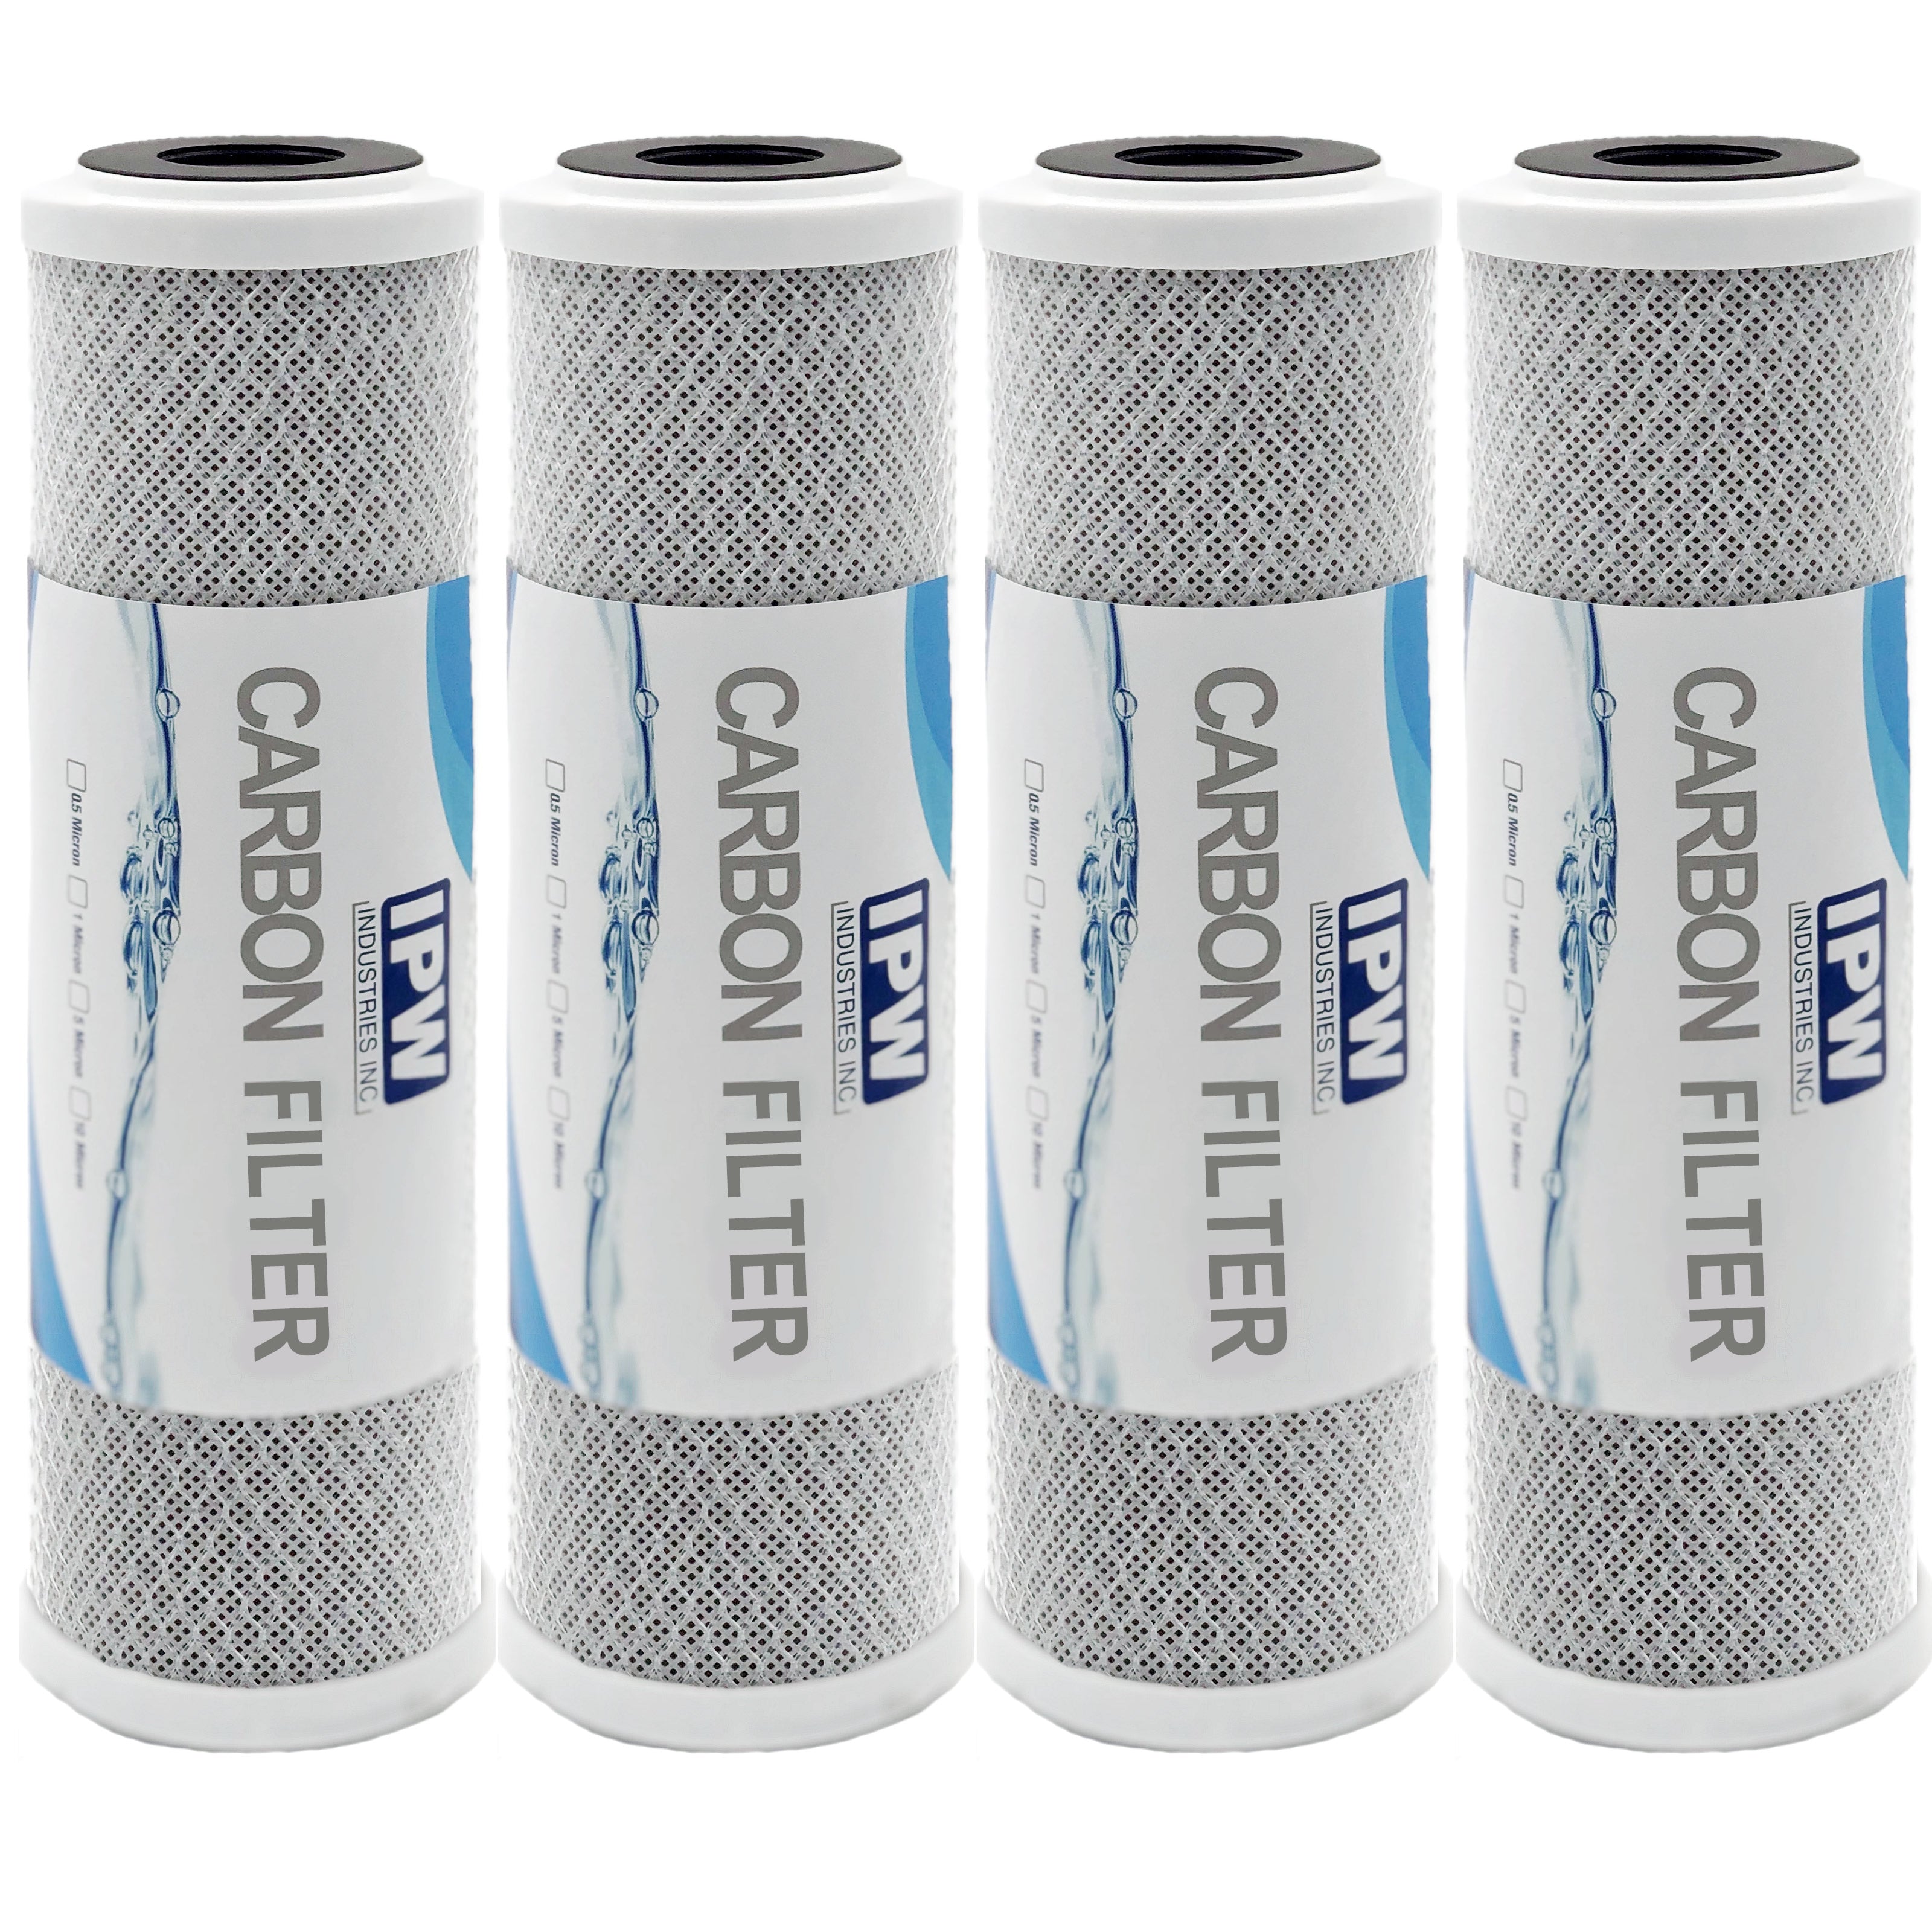 Premium Countertop Water Replacement Filter Compatible For Ecosoft For Use In The Countertop Ecosoft Water Filters, Pack Of 4